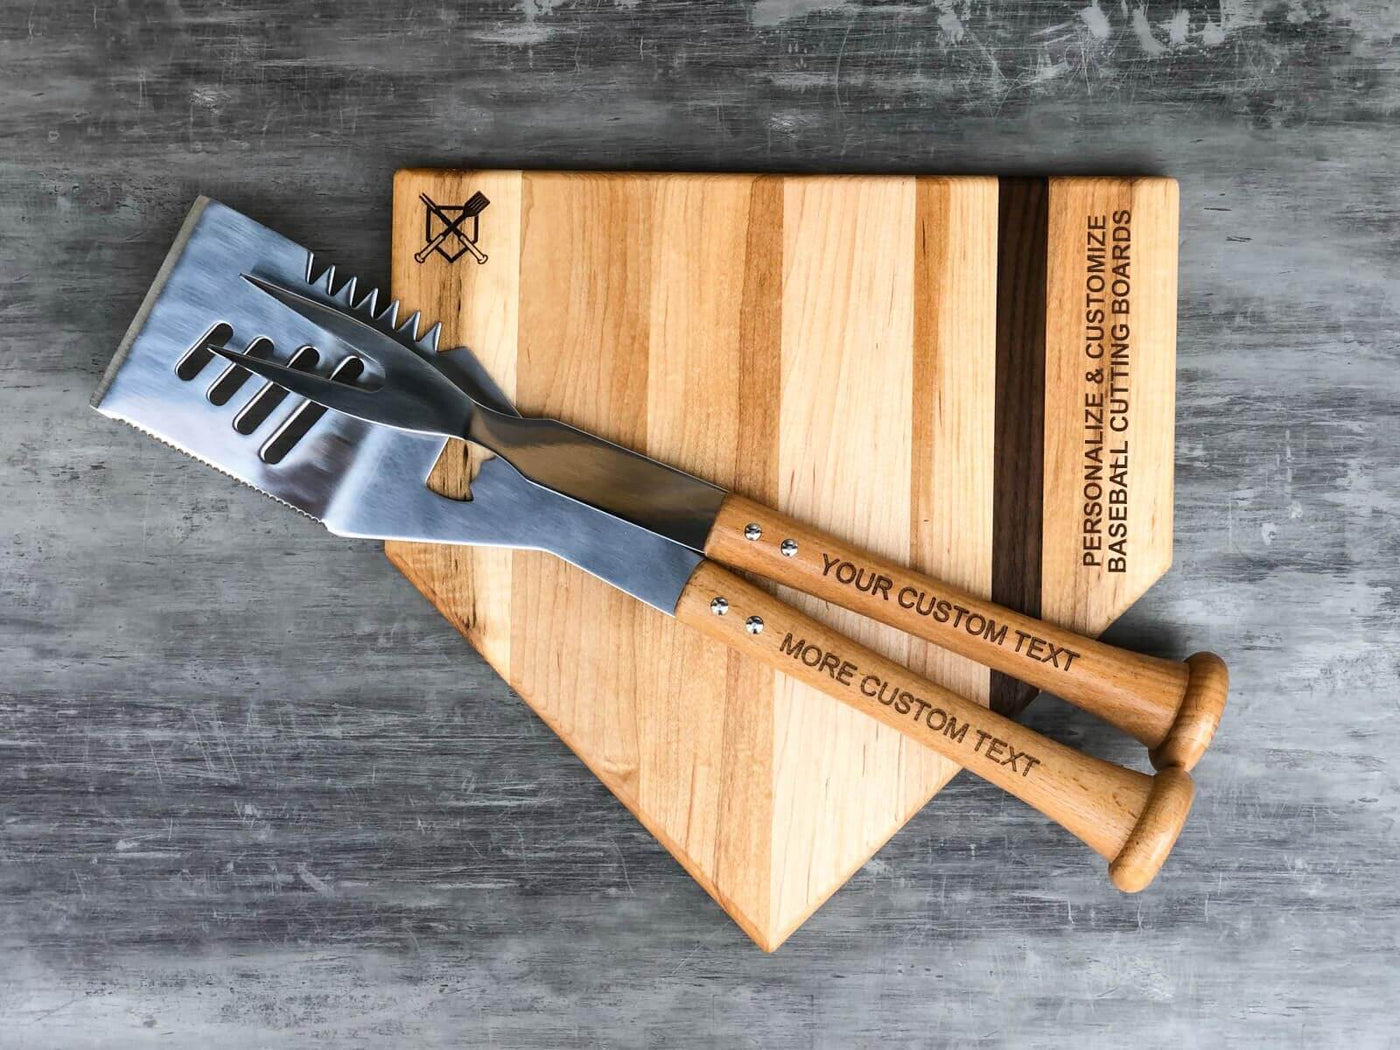 Baseball BBQ offers personalized laser engraving on our baseball grill tools and baseball-inspired hardwood cutting boards for the ultimate baseball fan gift.